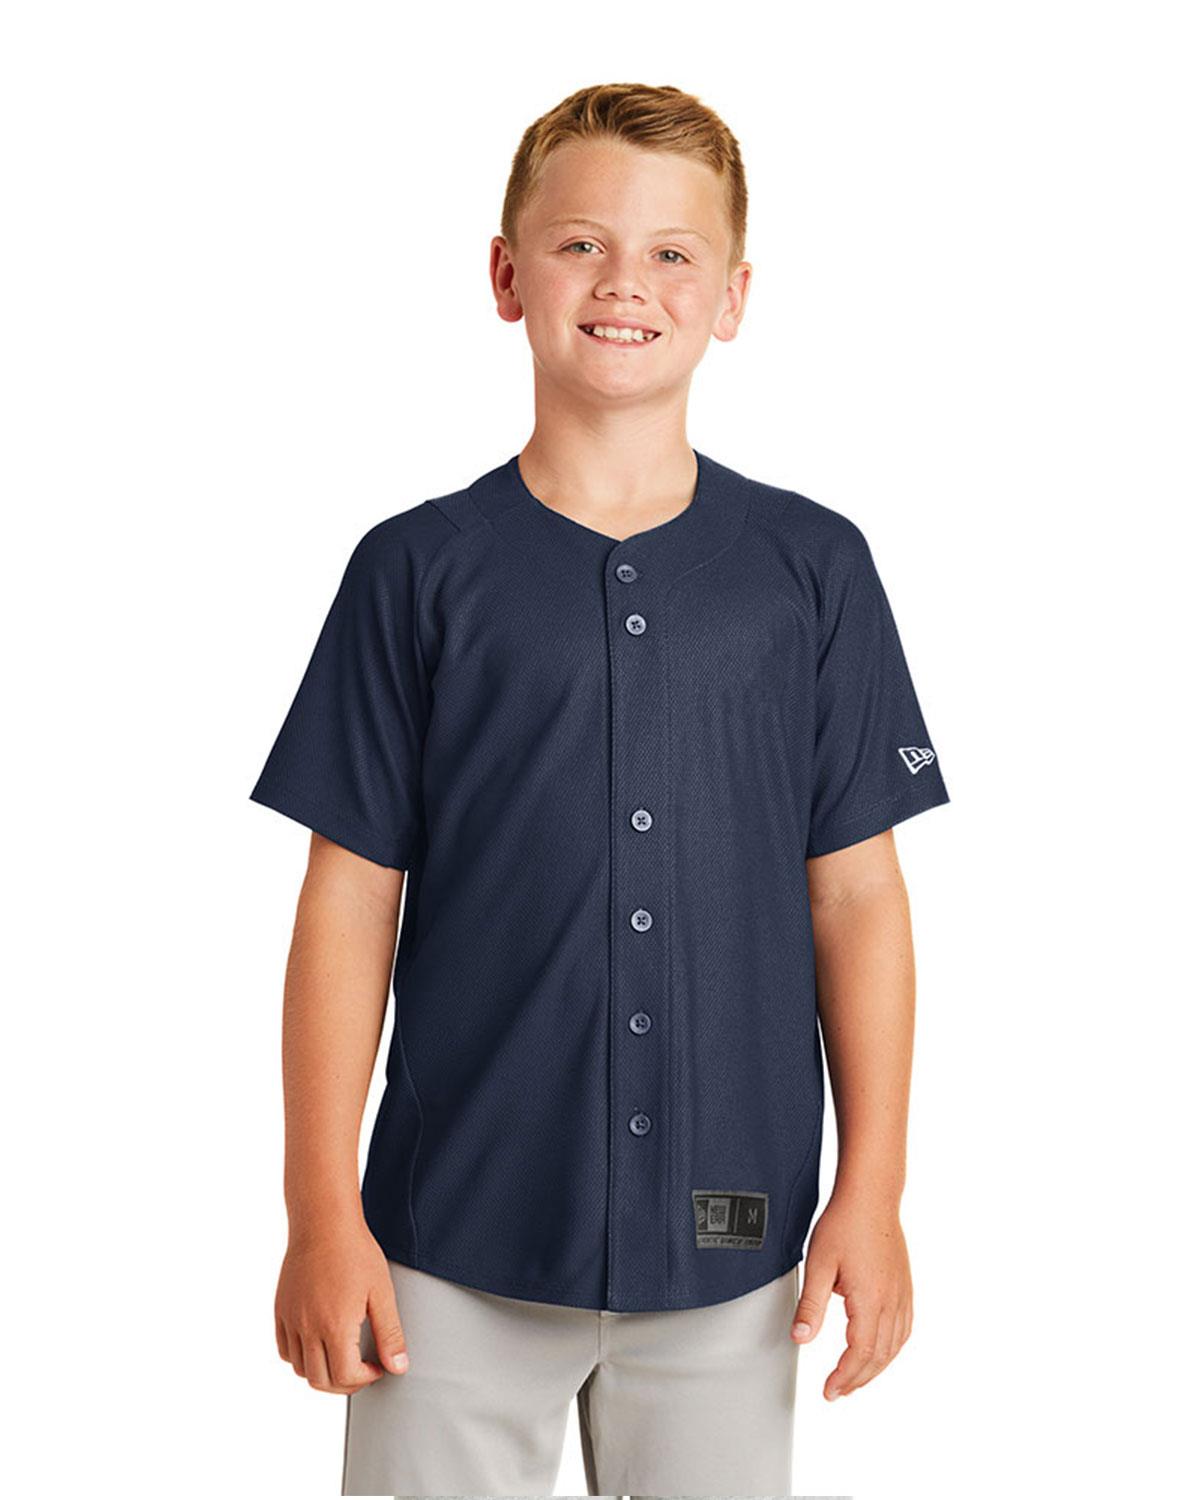 Size Chart for New Era YNEA220 Jersey - For Boys 